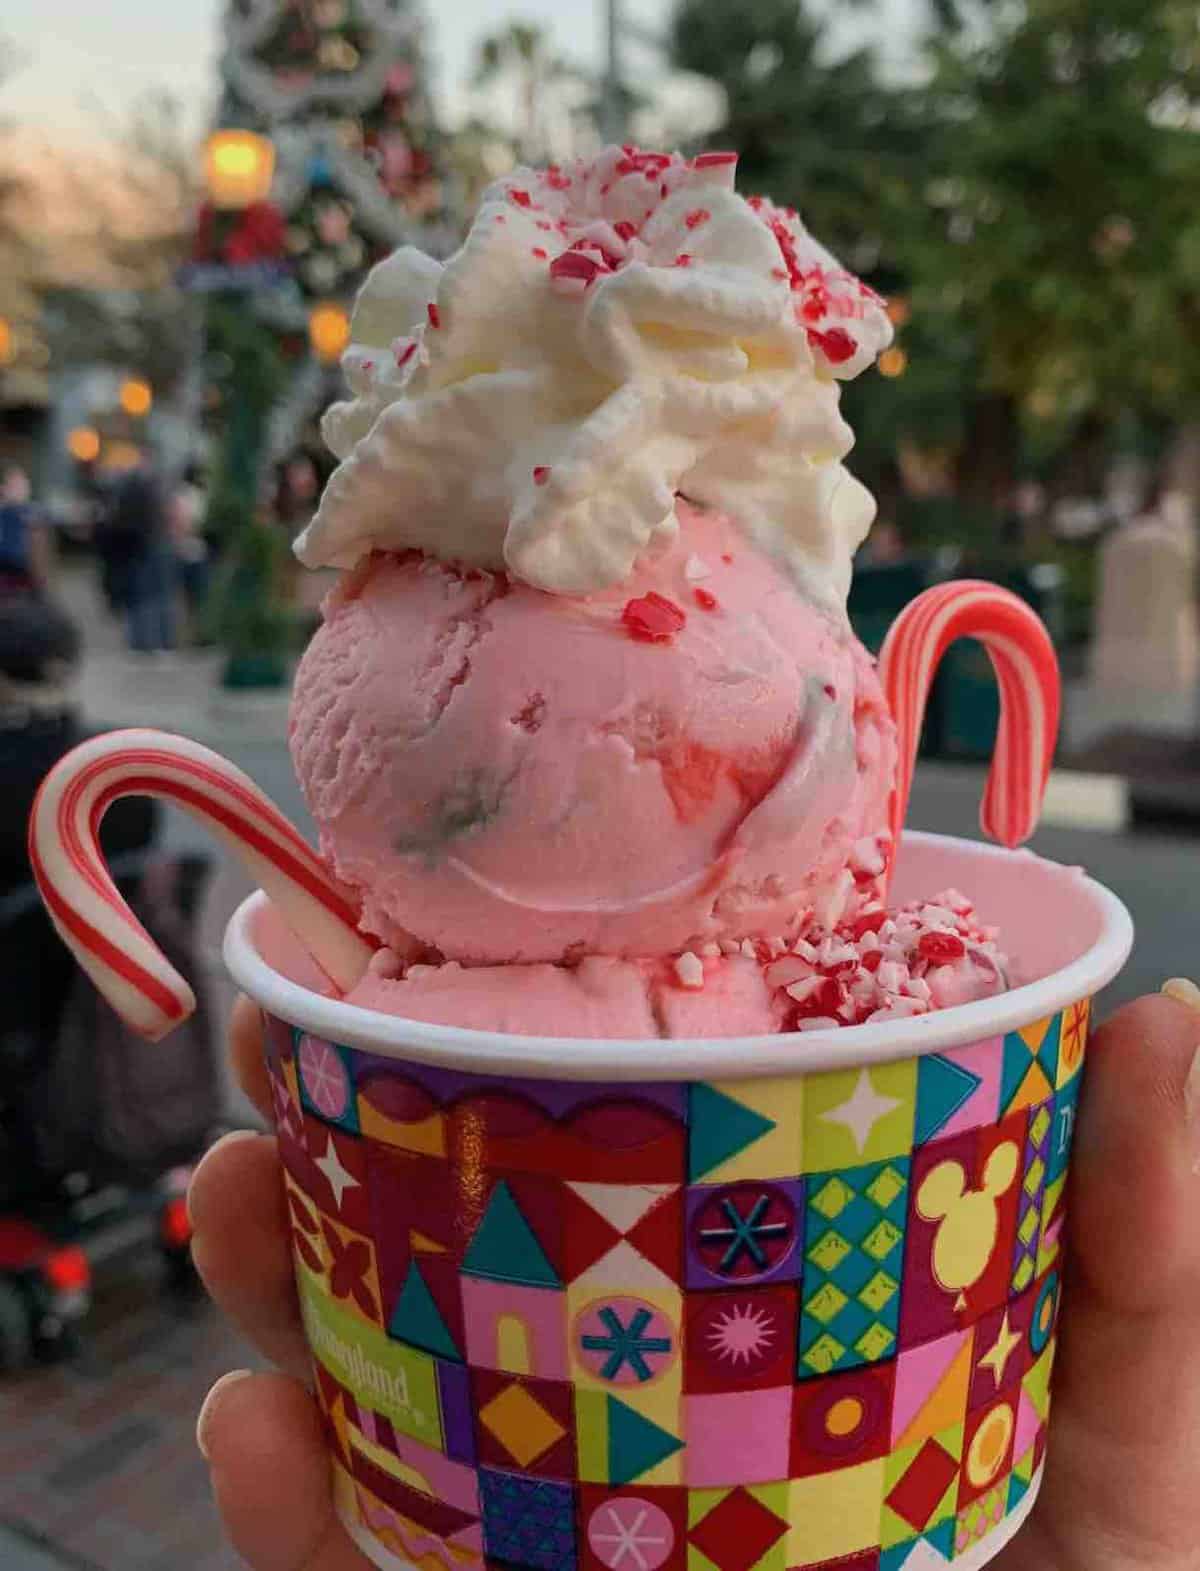 gluten-free Christmas candy cane sundae in a cup with two mini candy canes and whipped cream, Christmas tree in the background